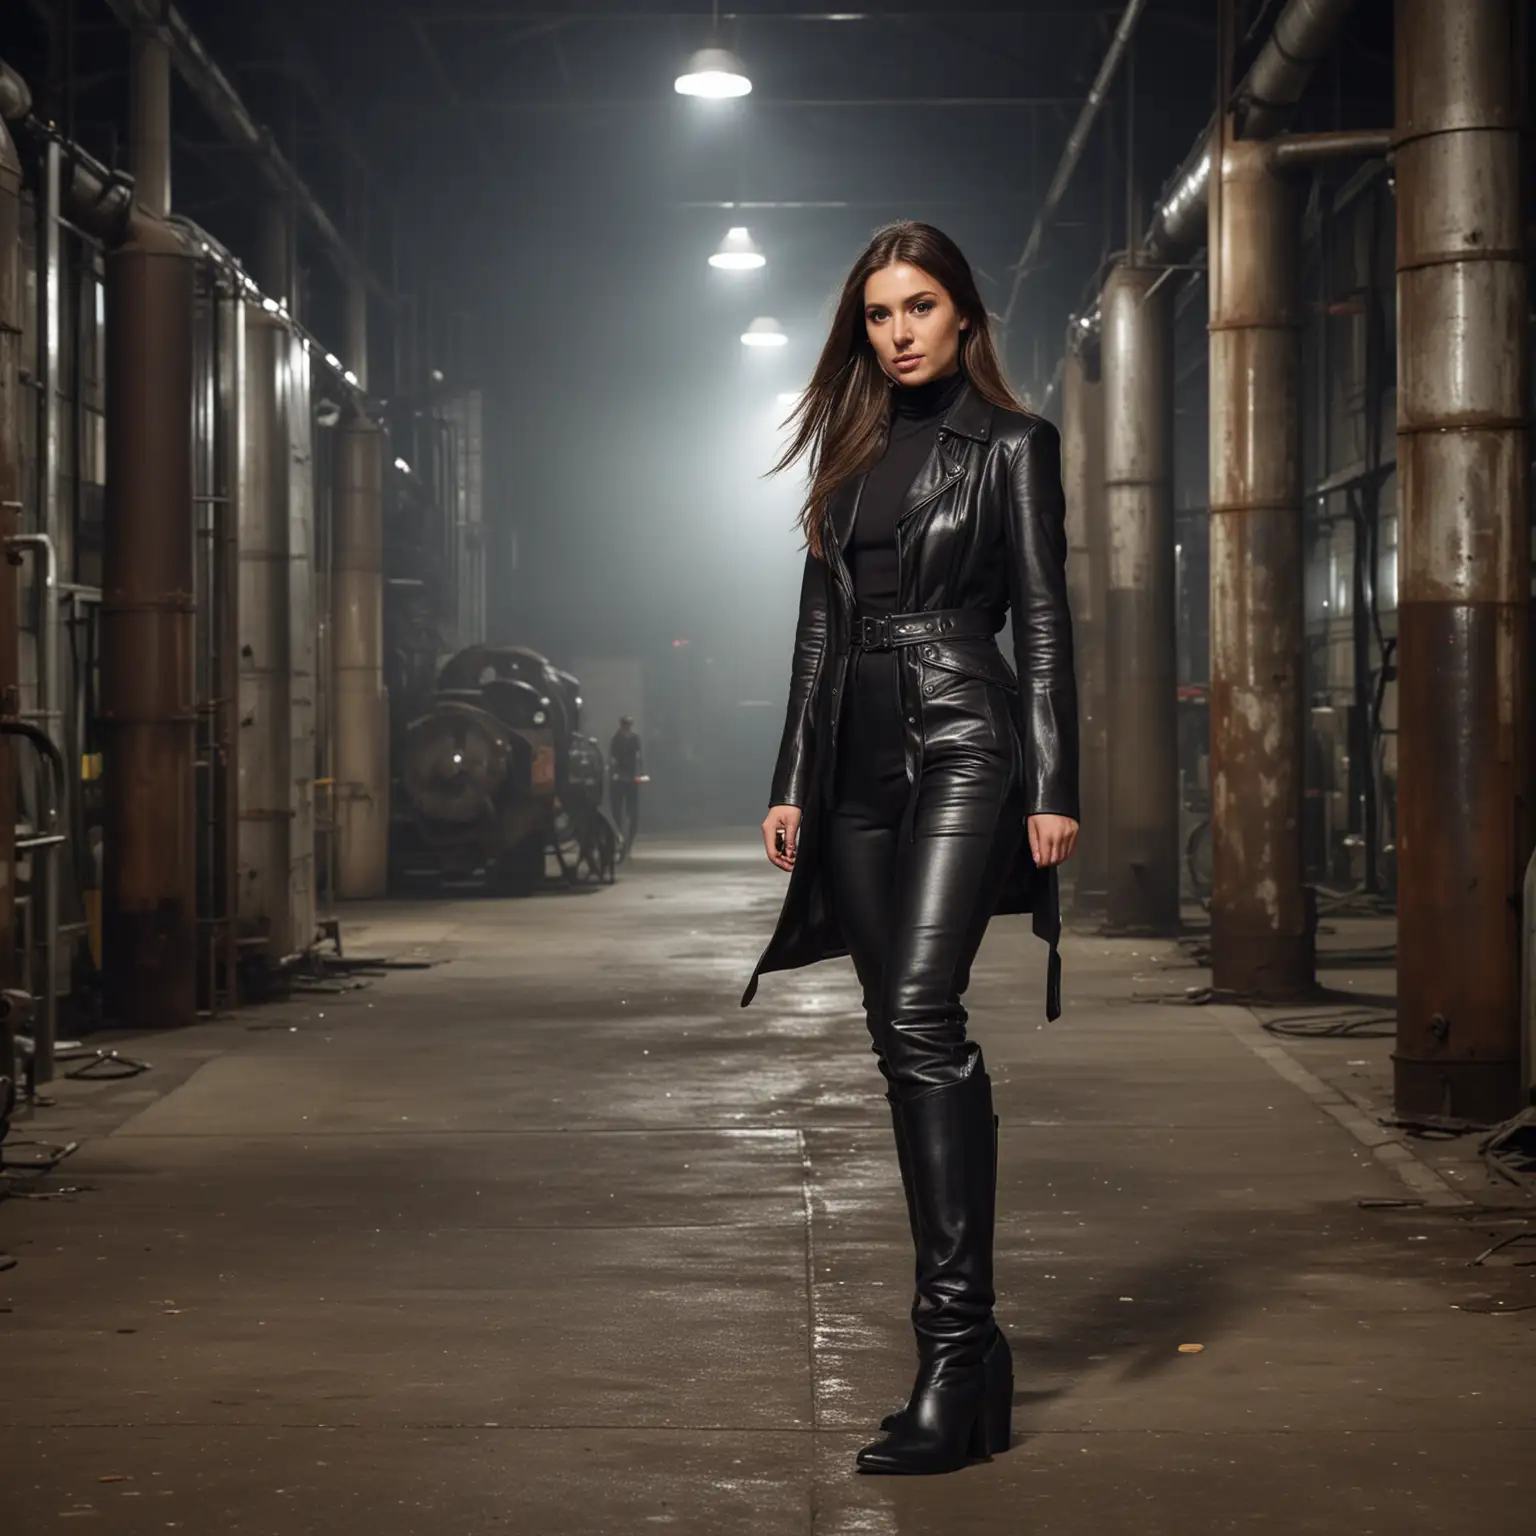 a brunette young lady, long hair, in a pony tail, walking with a long leather coat and leather pants and high heeled boots , at night in an old factory, with dimmed light
